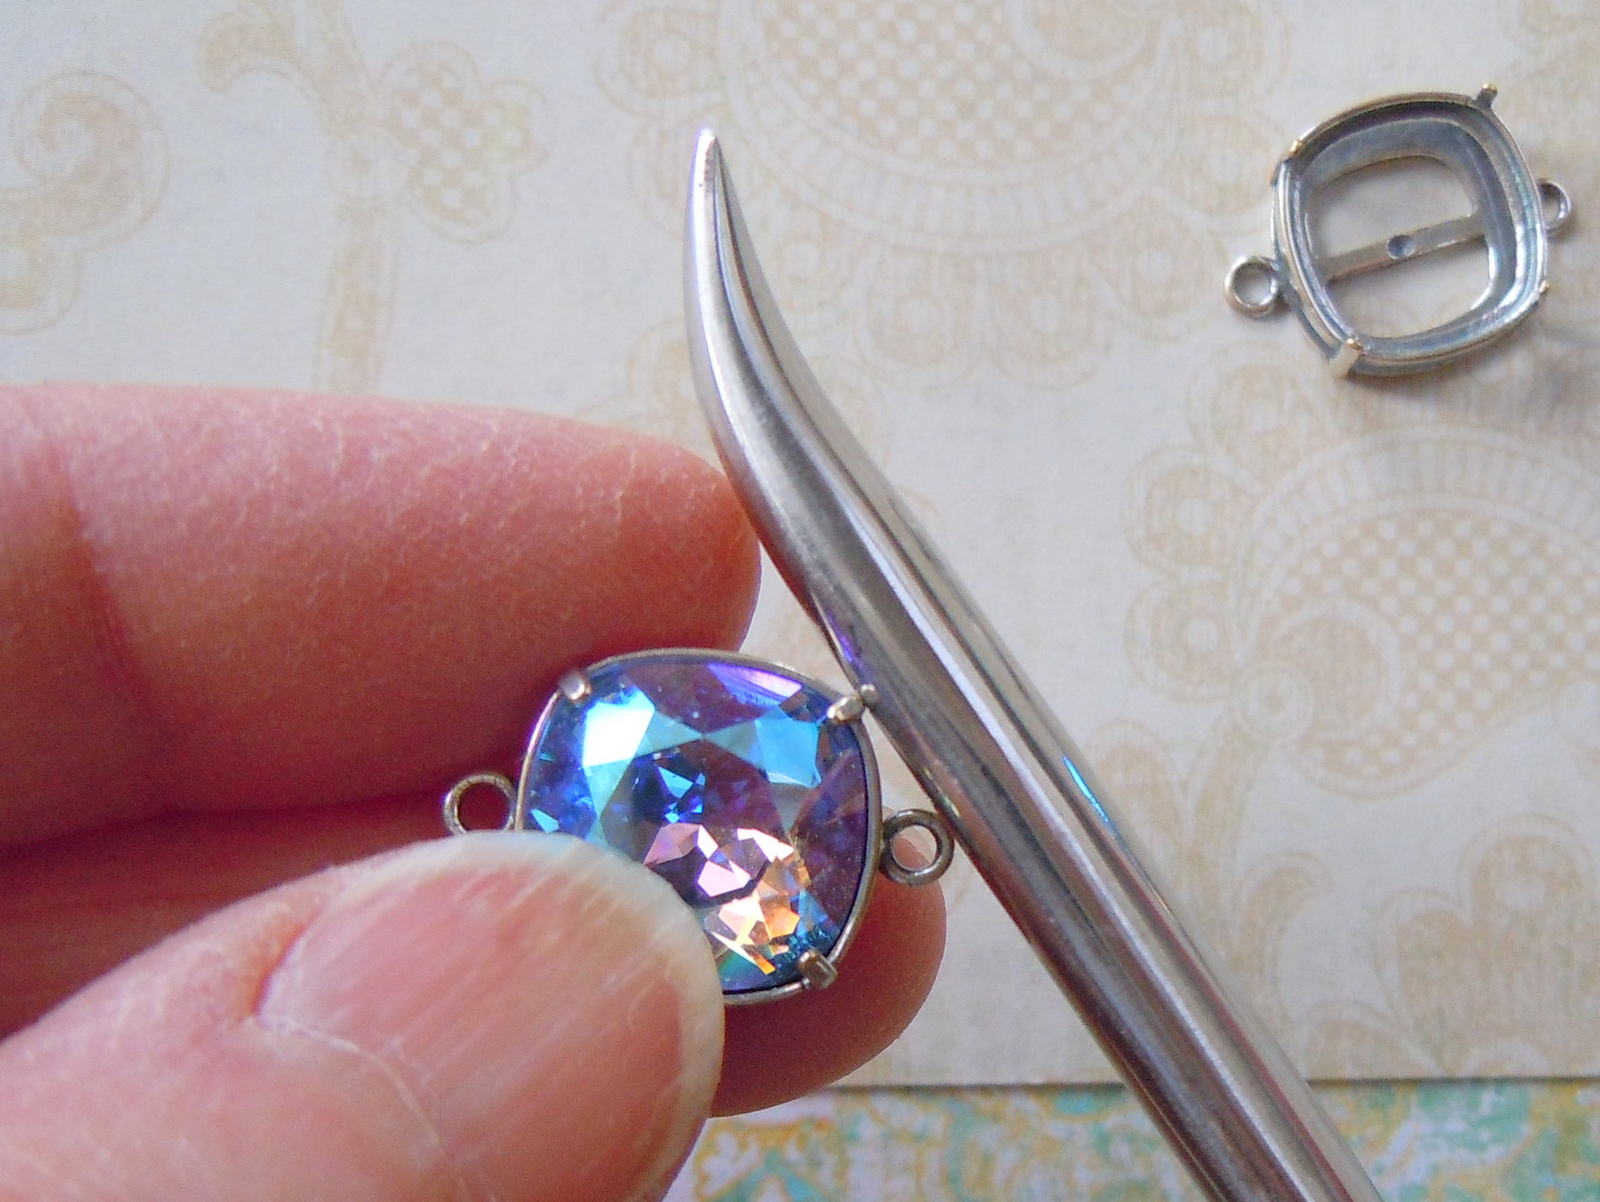 Place a Swarovski square cushion stone in the bezel setting. Firmly hold the bezel setting (or work on a rubber block). Use the burnisher to carefully push the first bezel prong until it is set against the stone. Rotate the bezel setting so the second prong you set is opposite the first one. Then set the final two prongs in the same manner. Repeat these steps with the second stone and setting. 